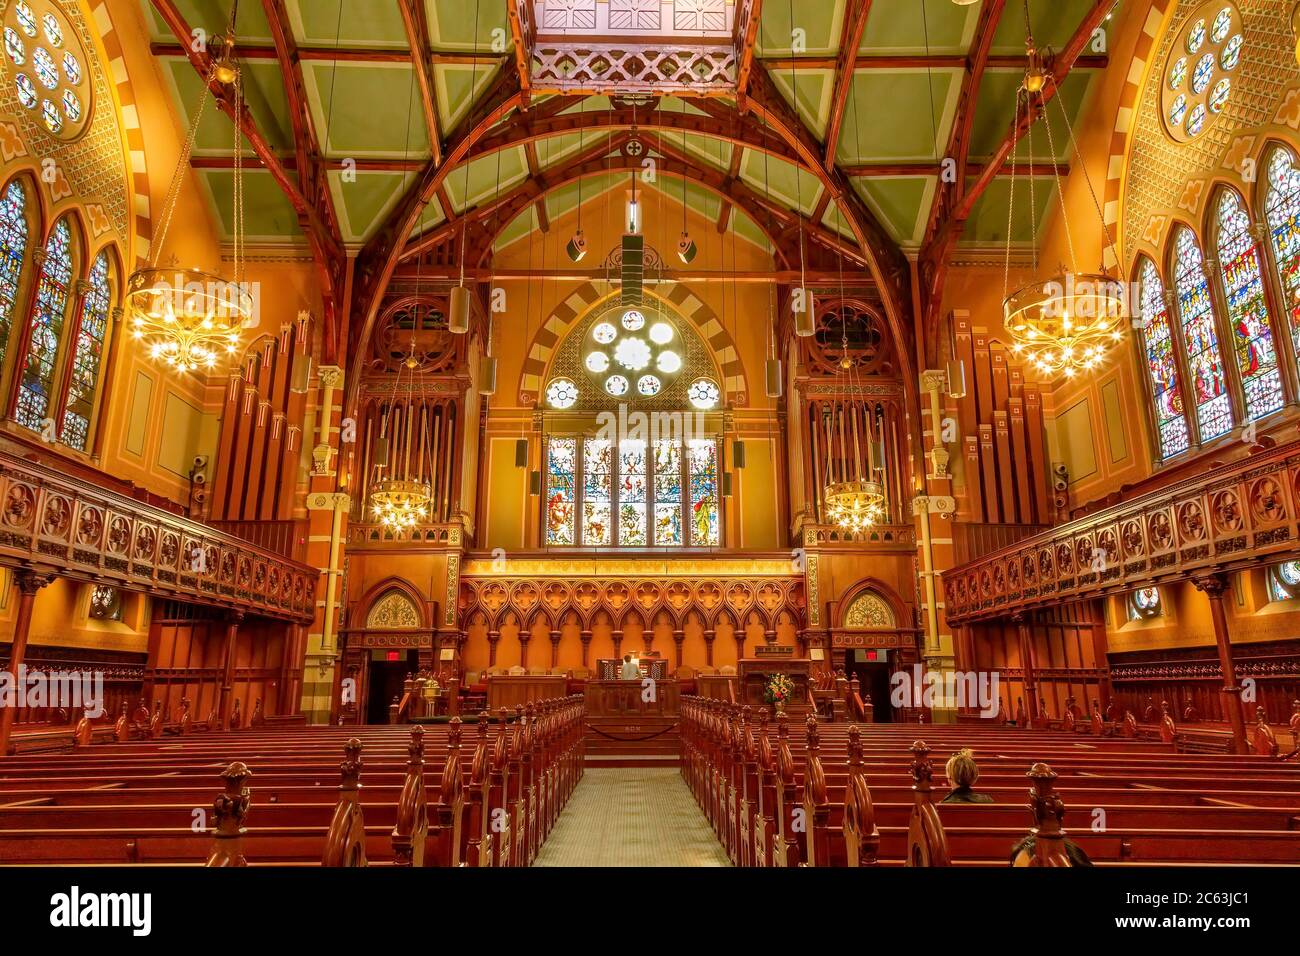 Old South Church in Boston, Massachusetts, is a historic United Church of Christ congregation first organized in 1669. Gothic Revival style by C.Amos Stock Photo